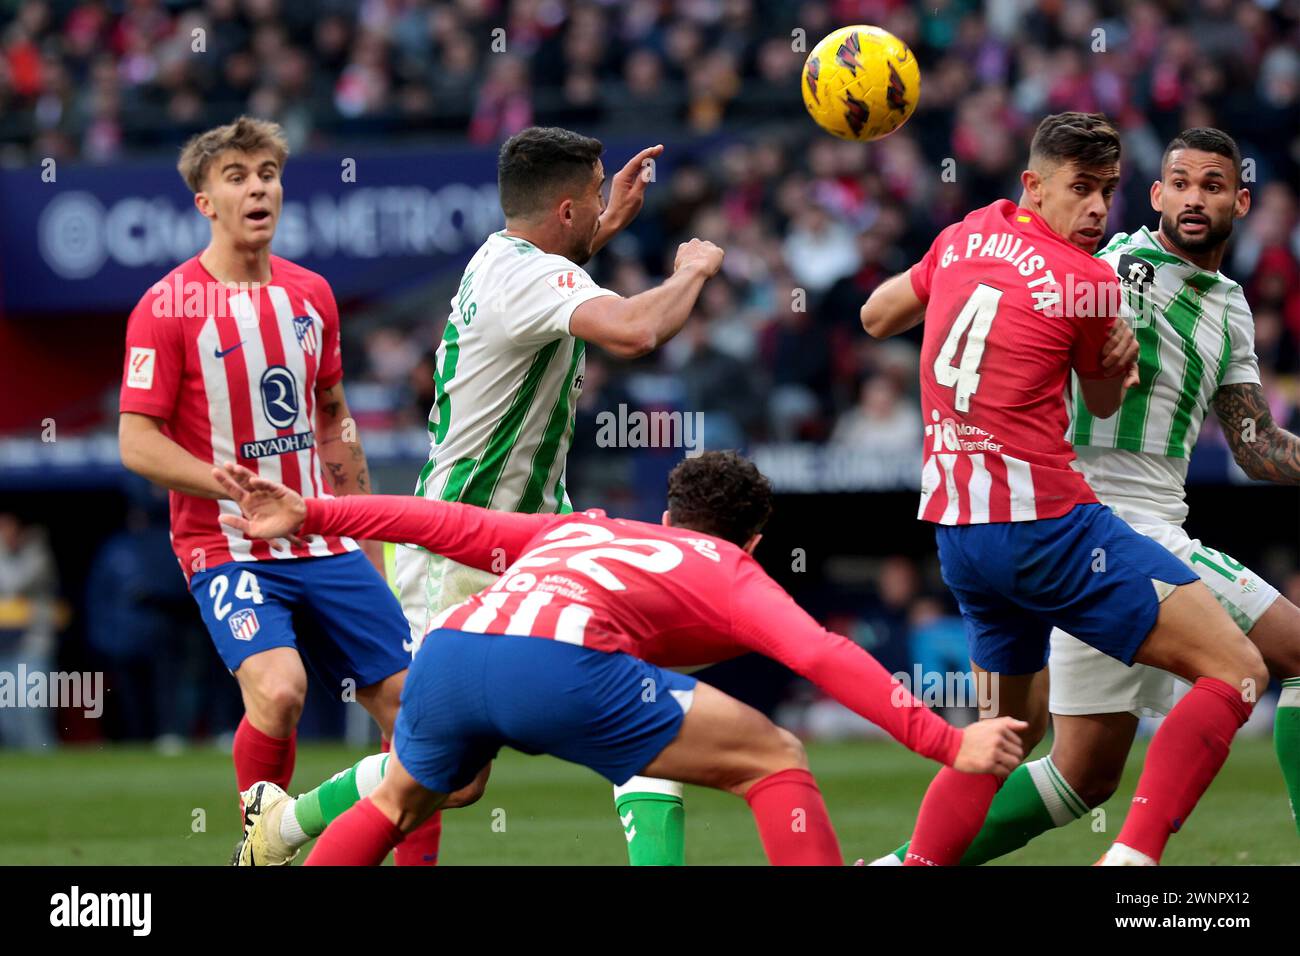 Madrid, Spanien. 03rd Mar, 2024. Madrid Spain; 03.03.2024.- Atlético de Madrid beats Betis 2-1 at the Civitas Meropolitano stadium in the capital of the Kingdom of Spain on matchday 27. With goals from Rui Tiago Dantas Silva (8' own goal) and Álvaro Morata (44'), Atlético maintained its unbeaten streak in their field against Betis, who scored their goal in the 62nd minute through William Carvalho. Credit: Juan Carlos Rojas/dpa/Alamy Live News Stock Photo